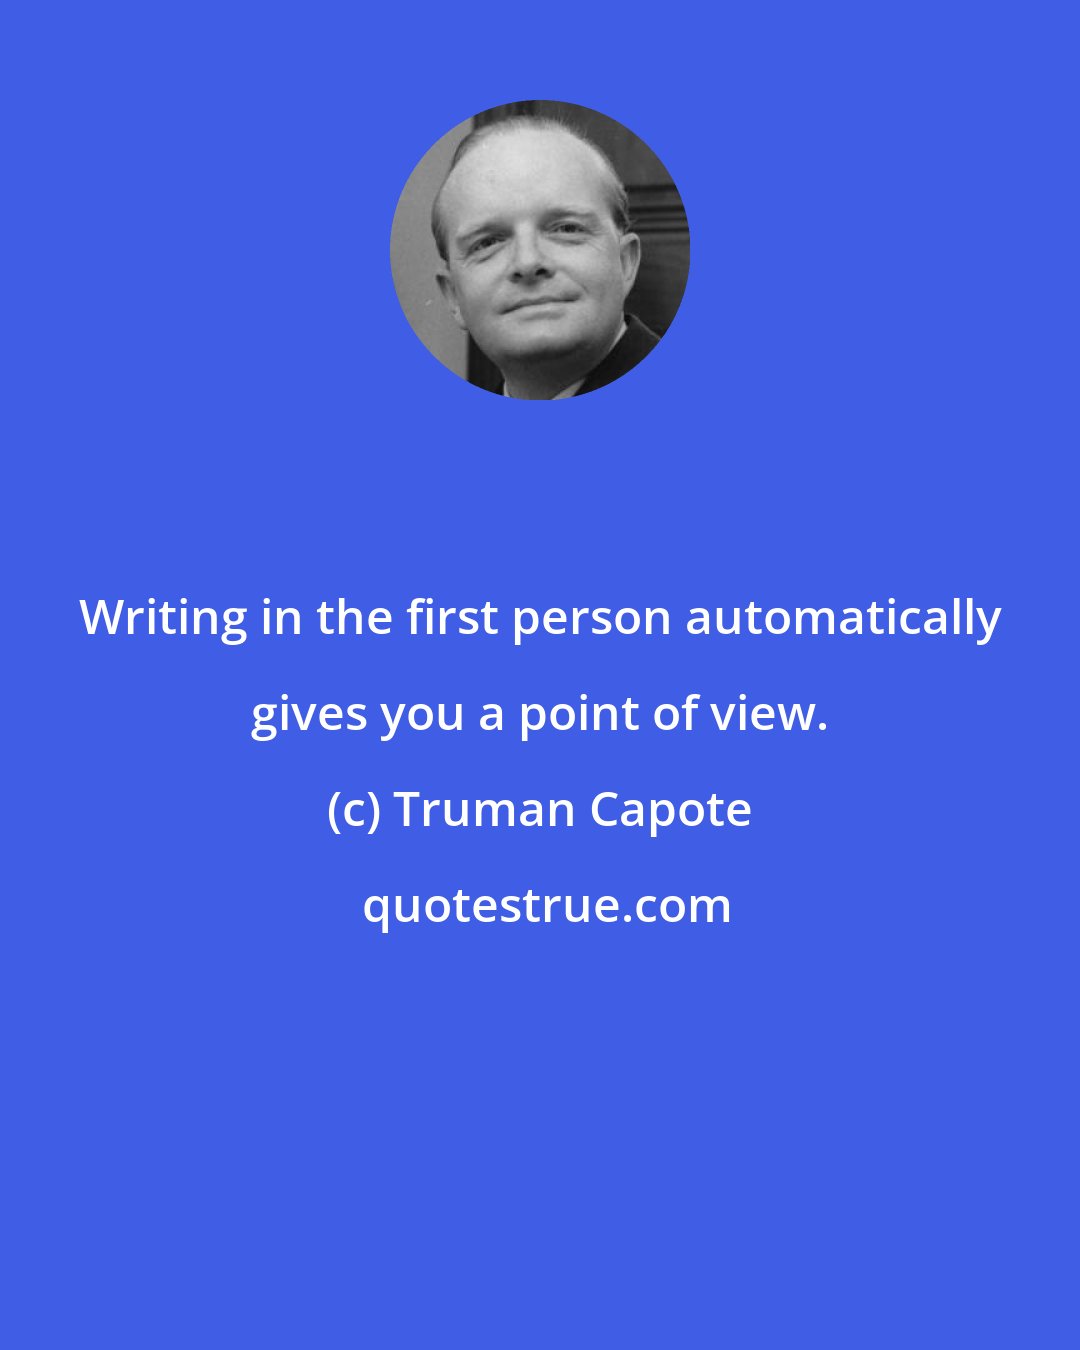 Truman Capote: Writing in the first person automatically gives you a point of view.